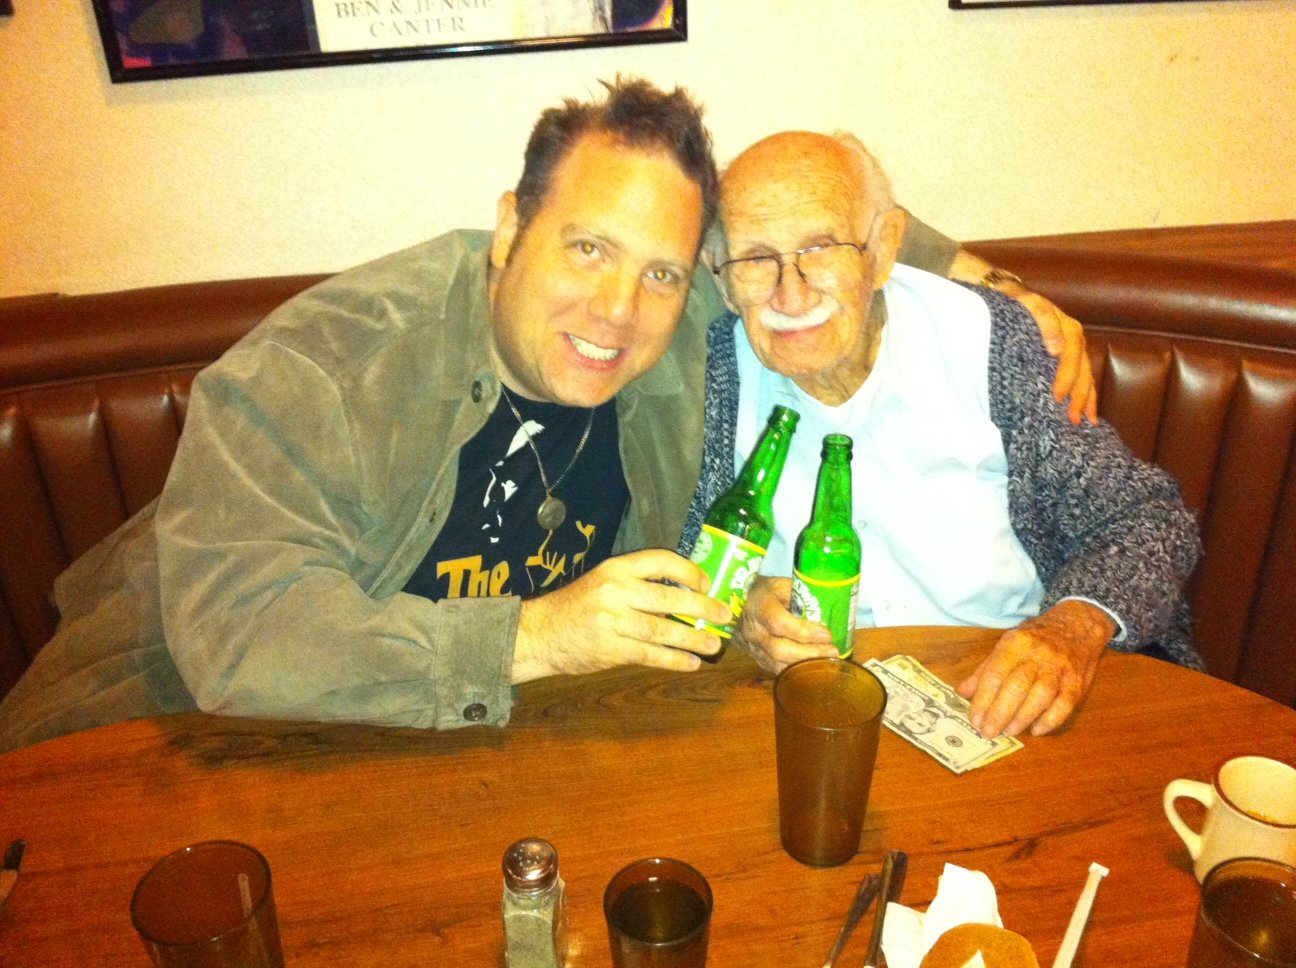 Downing a Dr. Browns Celery Soda at Canters with my buddy,actor Murray Gershenz from The Hangover.